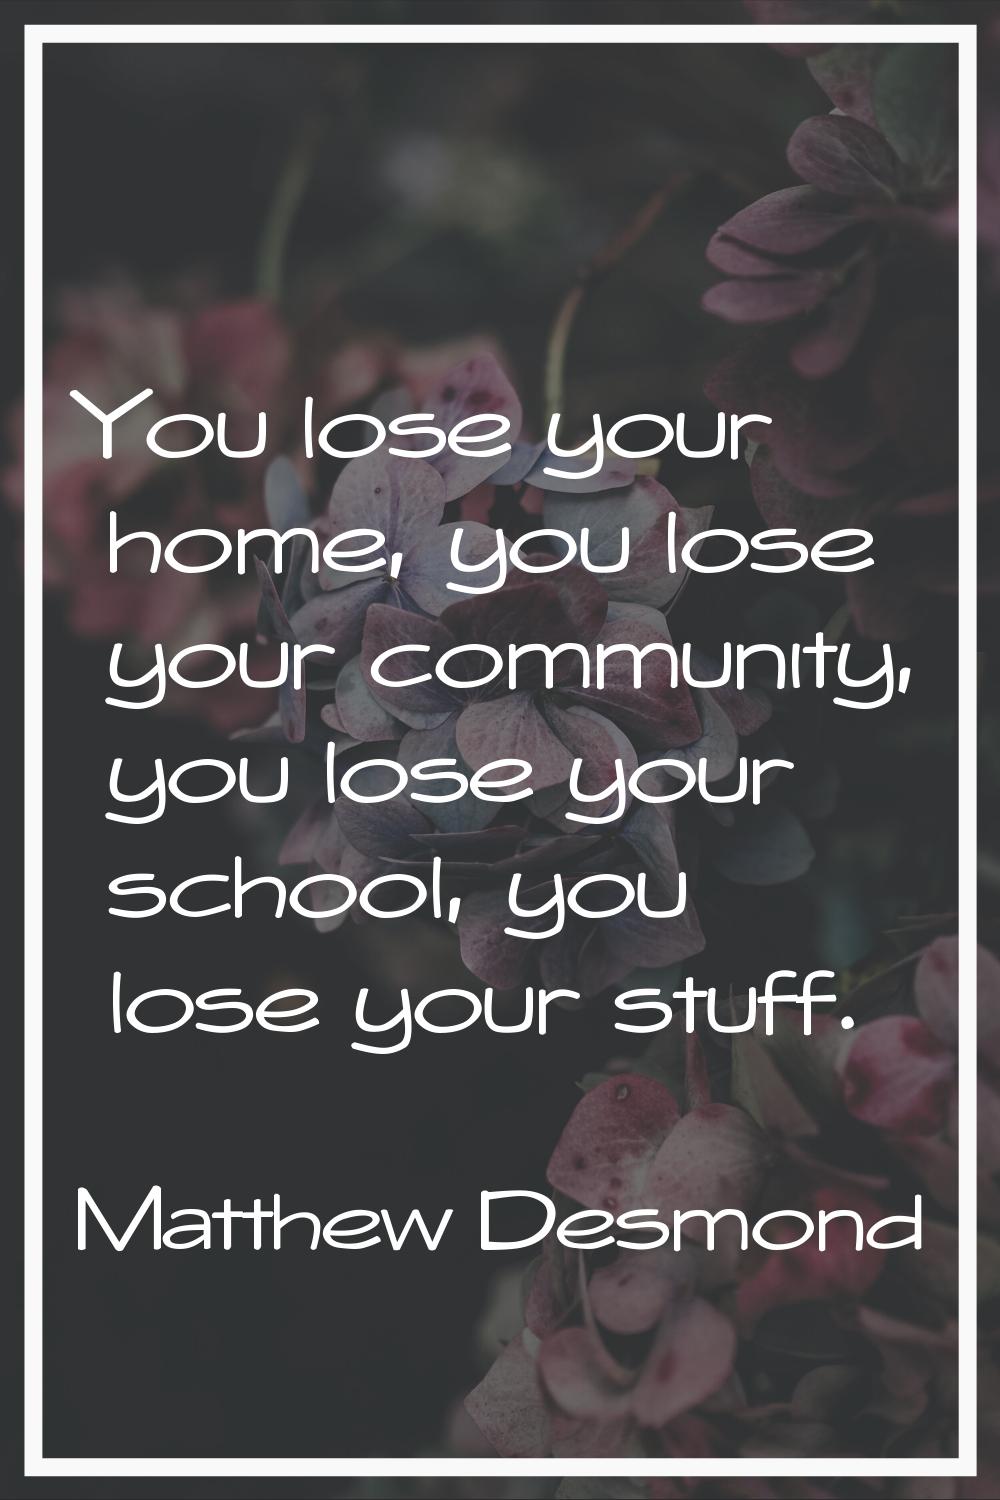 You lose your home, you lose your community, you lose your school, you lose your stuff.